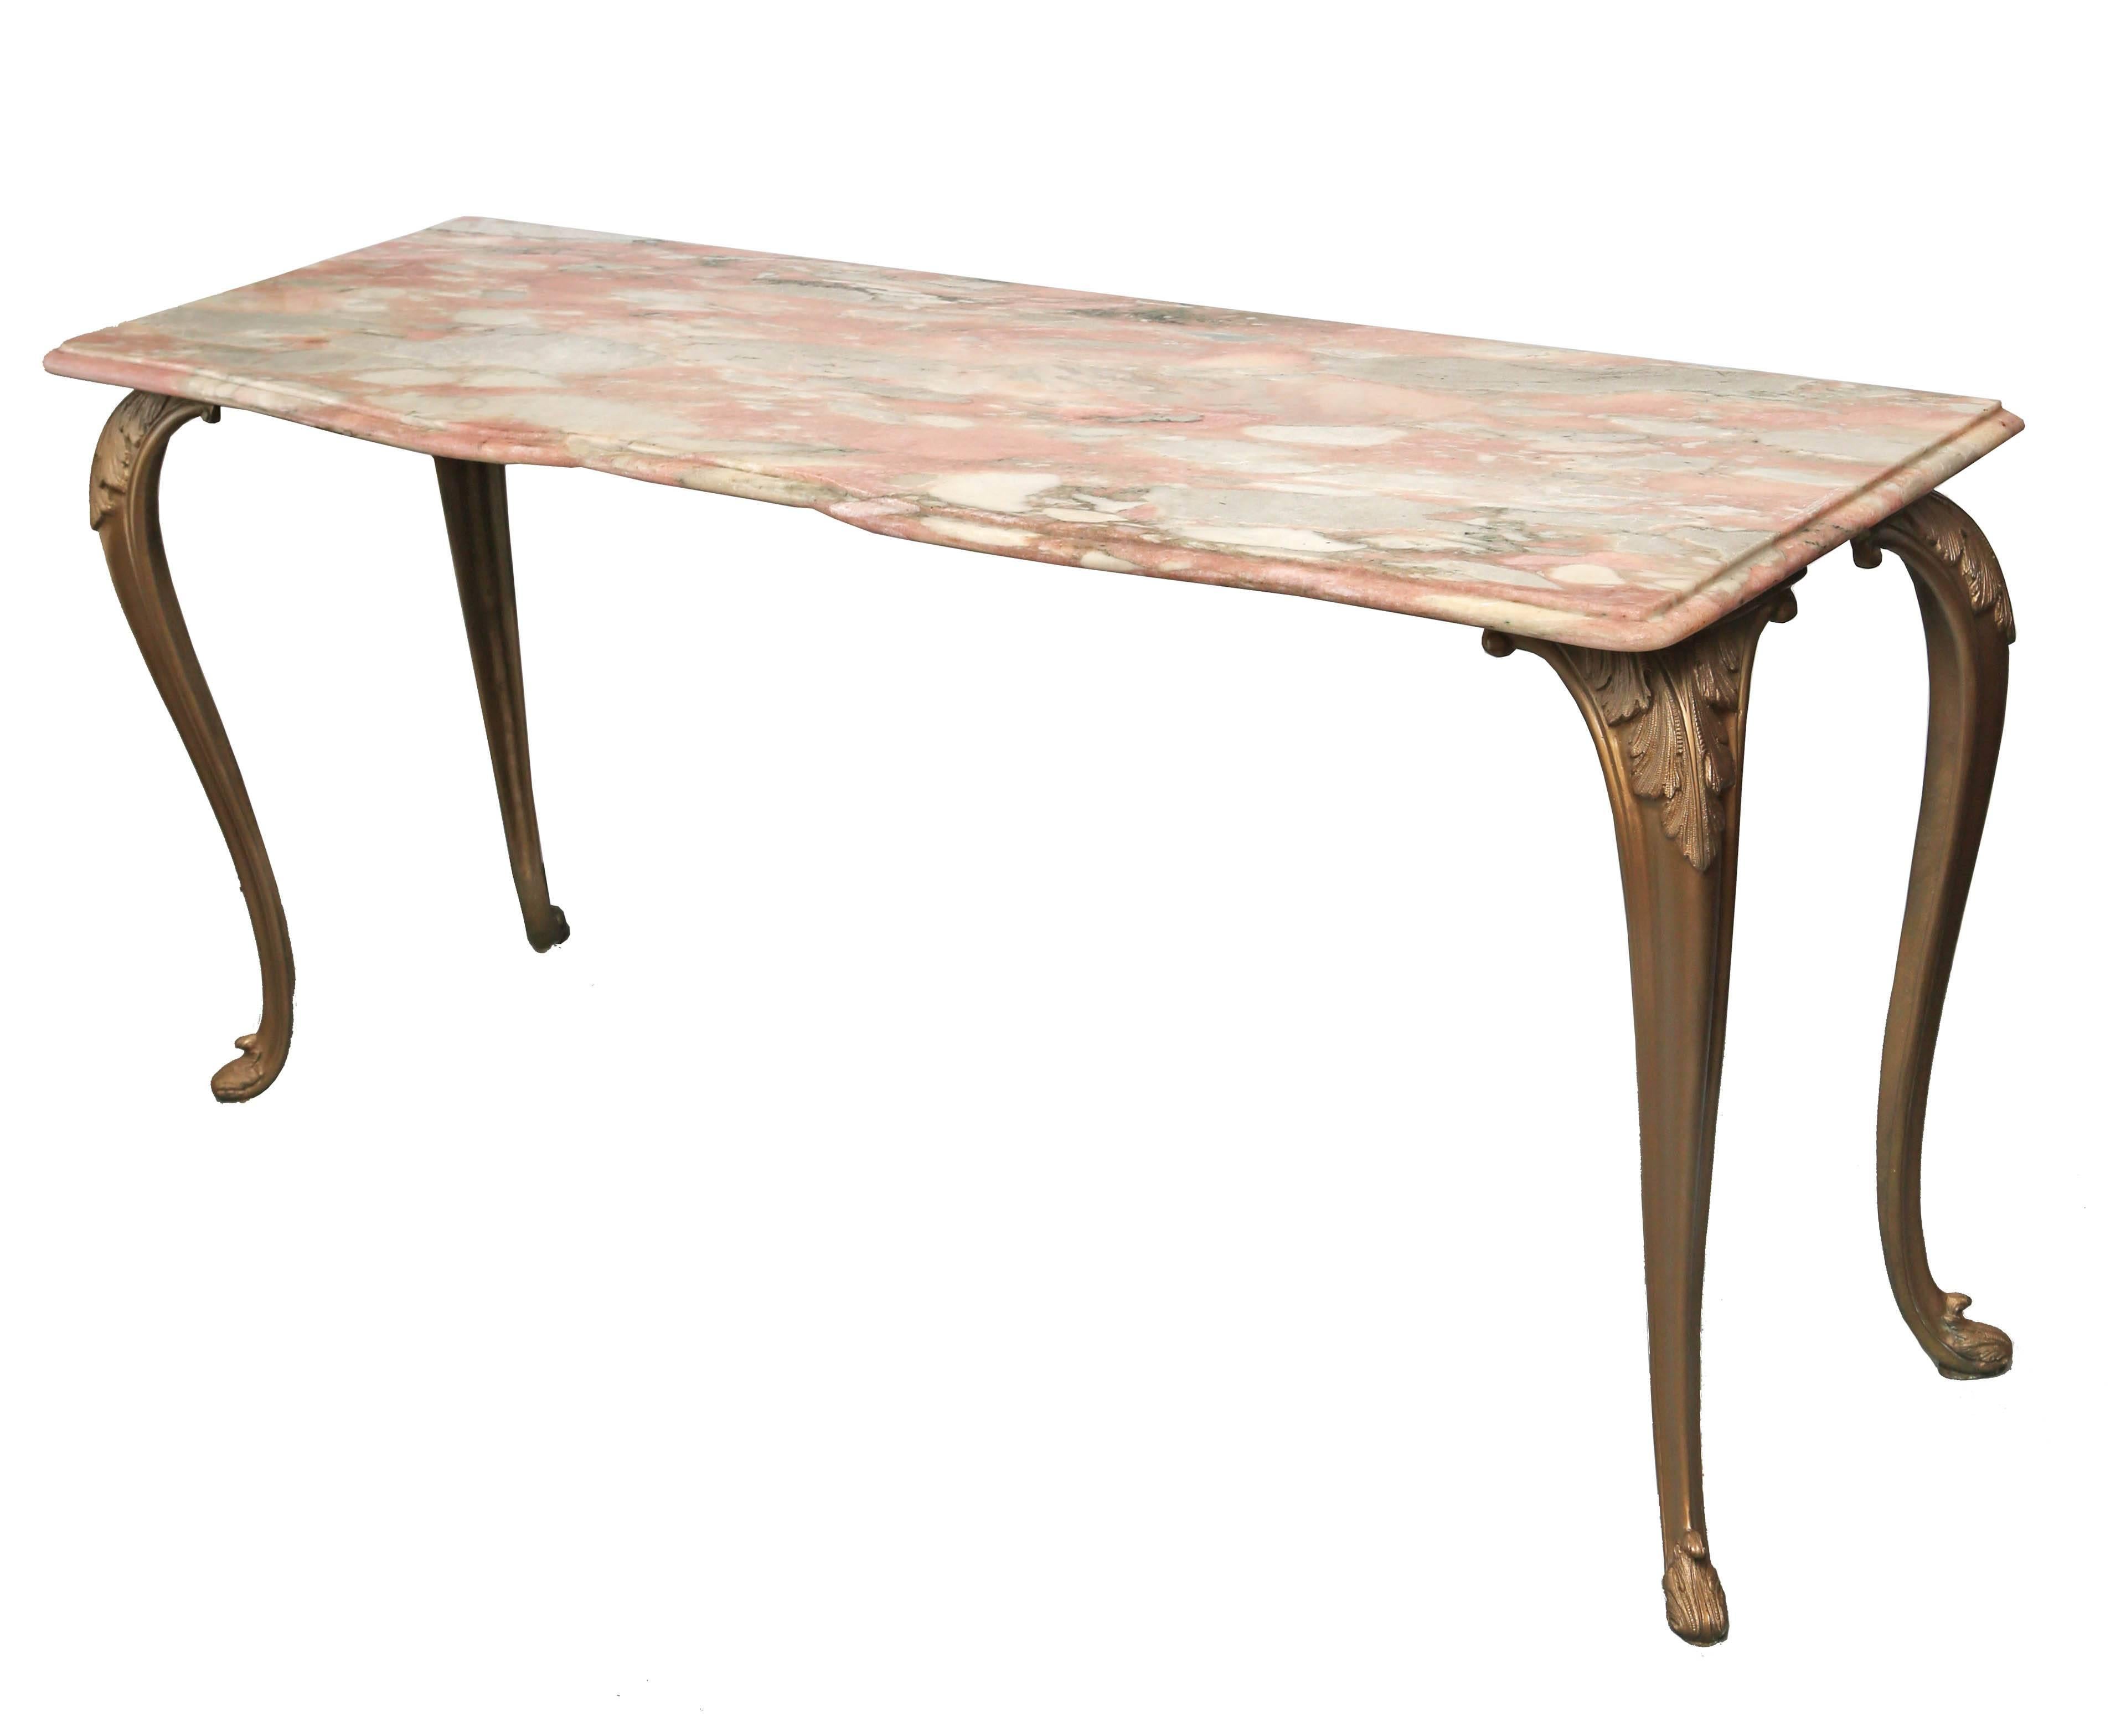 Wonderful rare pink or salmon marble and bronze console table. Made in Italy.